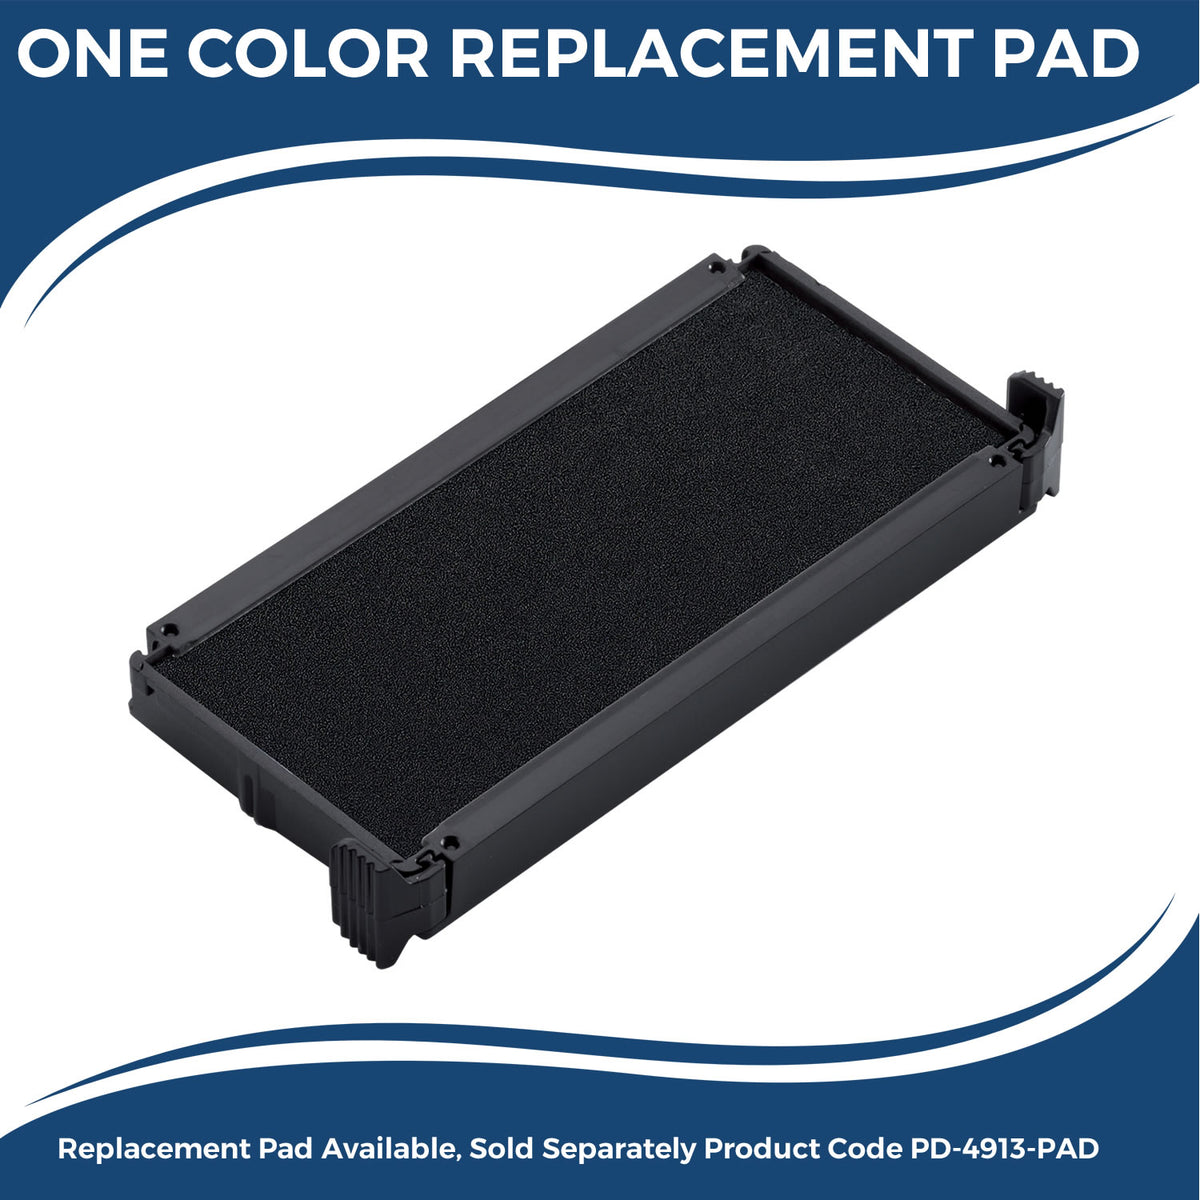 Large Self-Inking Bold Fragile Stamp 5641S Large Replacment Pad